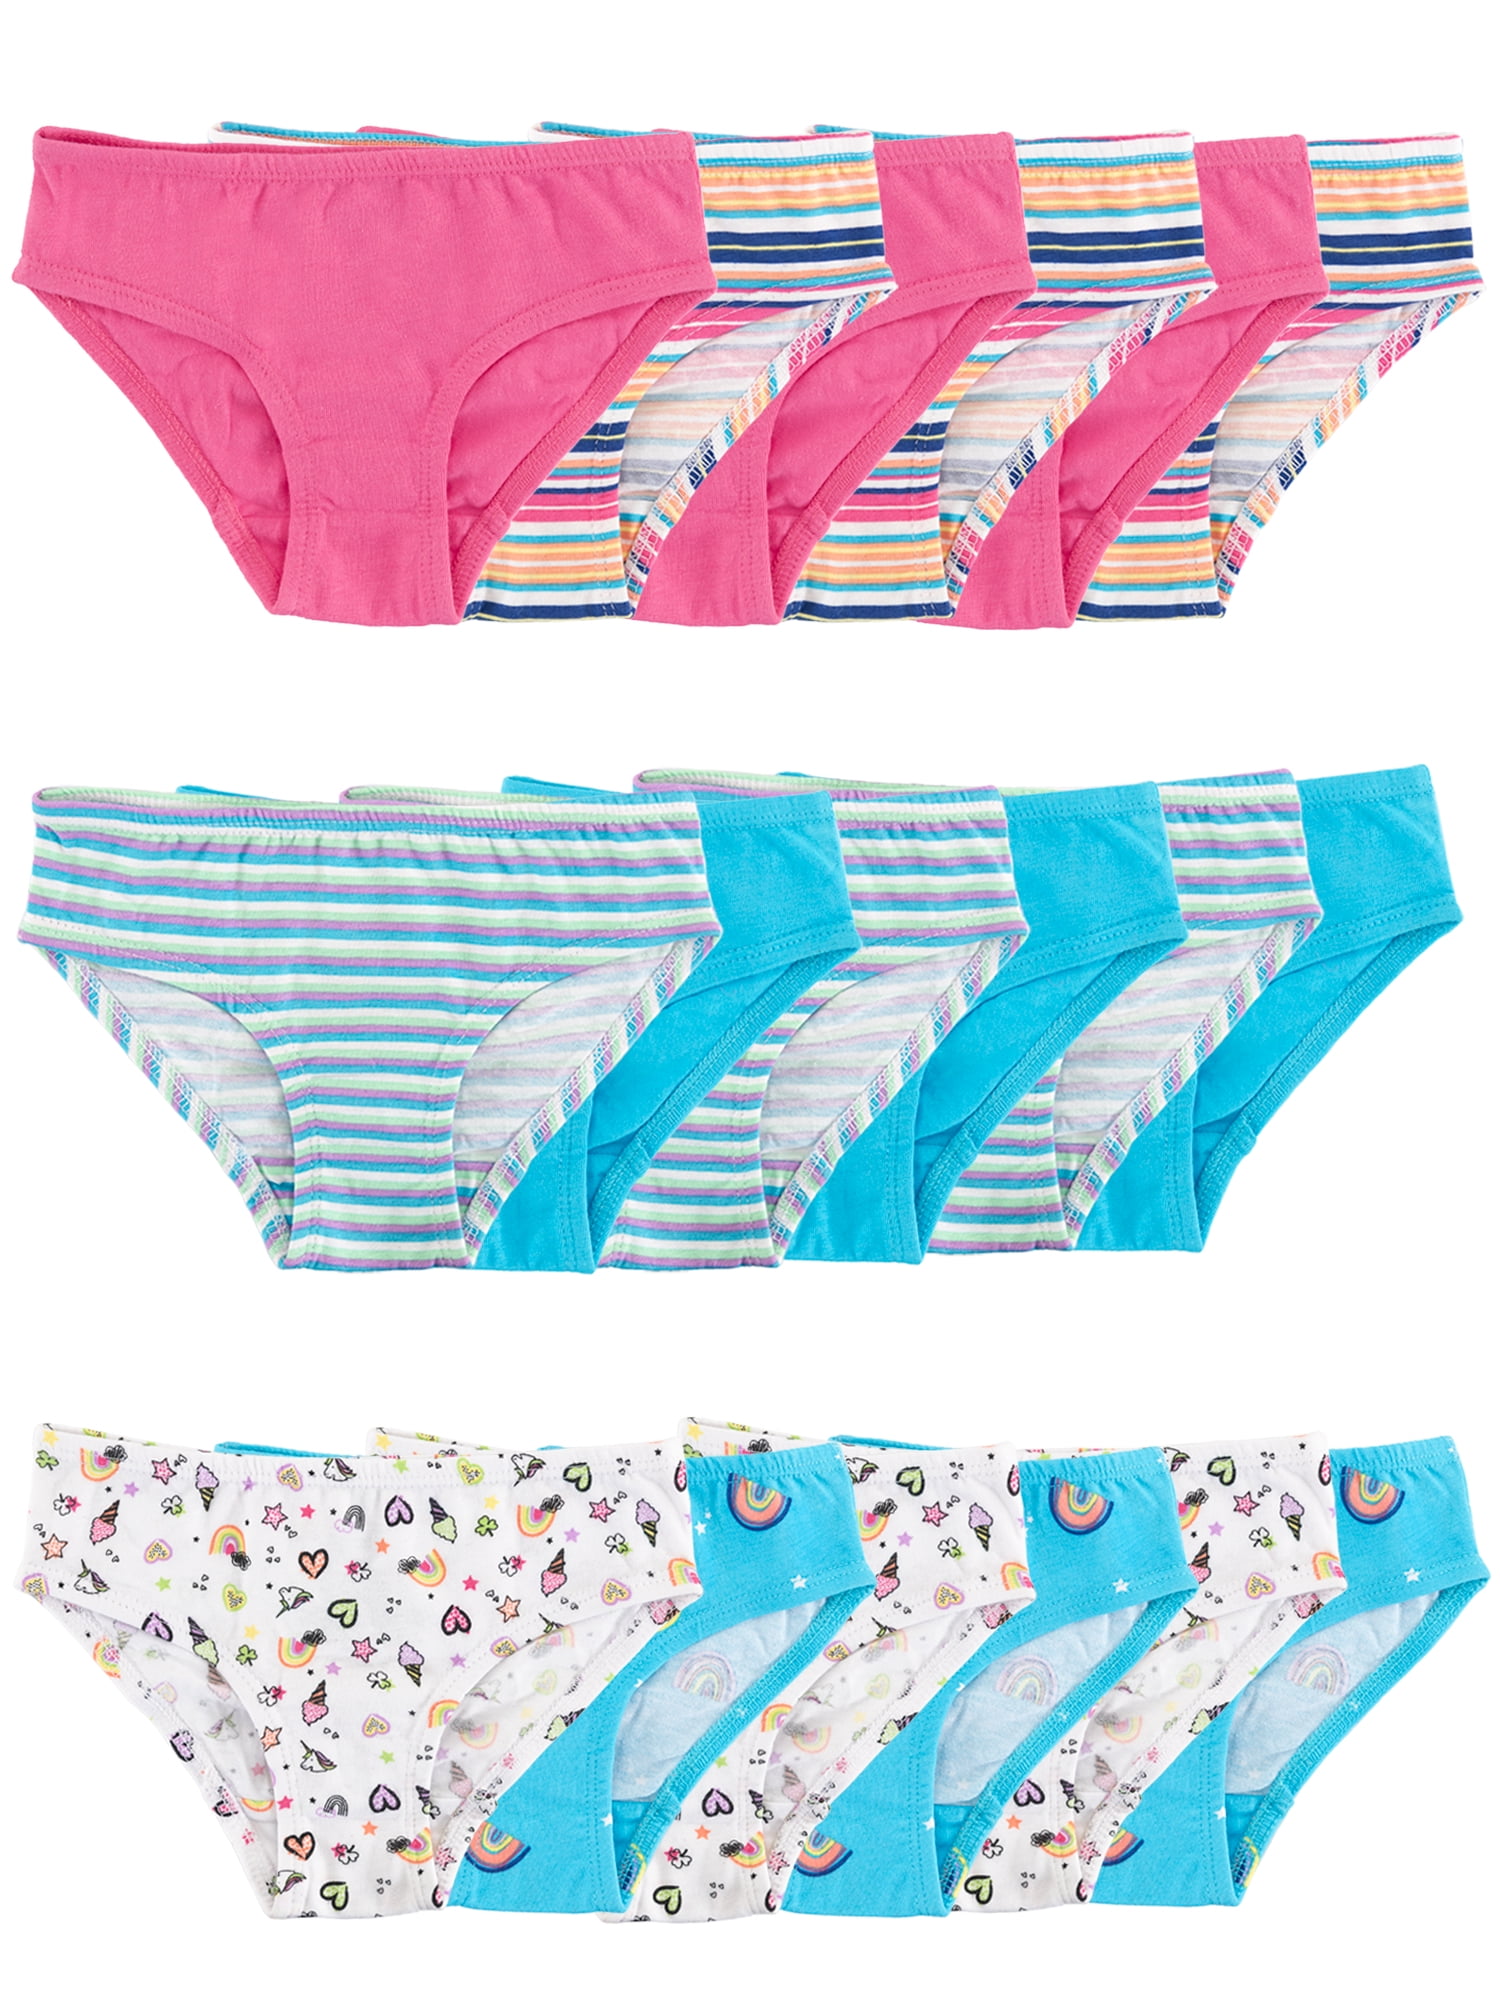 4T/5T NEW Wonder Nation Toddler Girl's 10 Pack Hipsters Sizes 2T/3T 